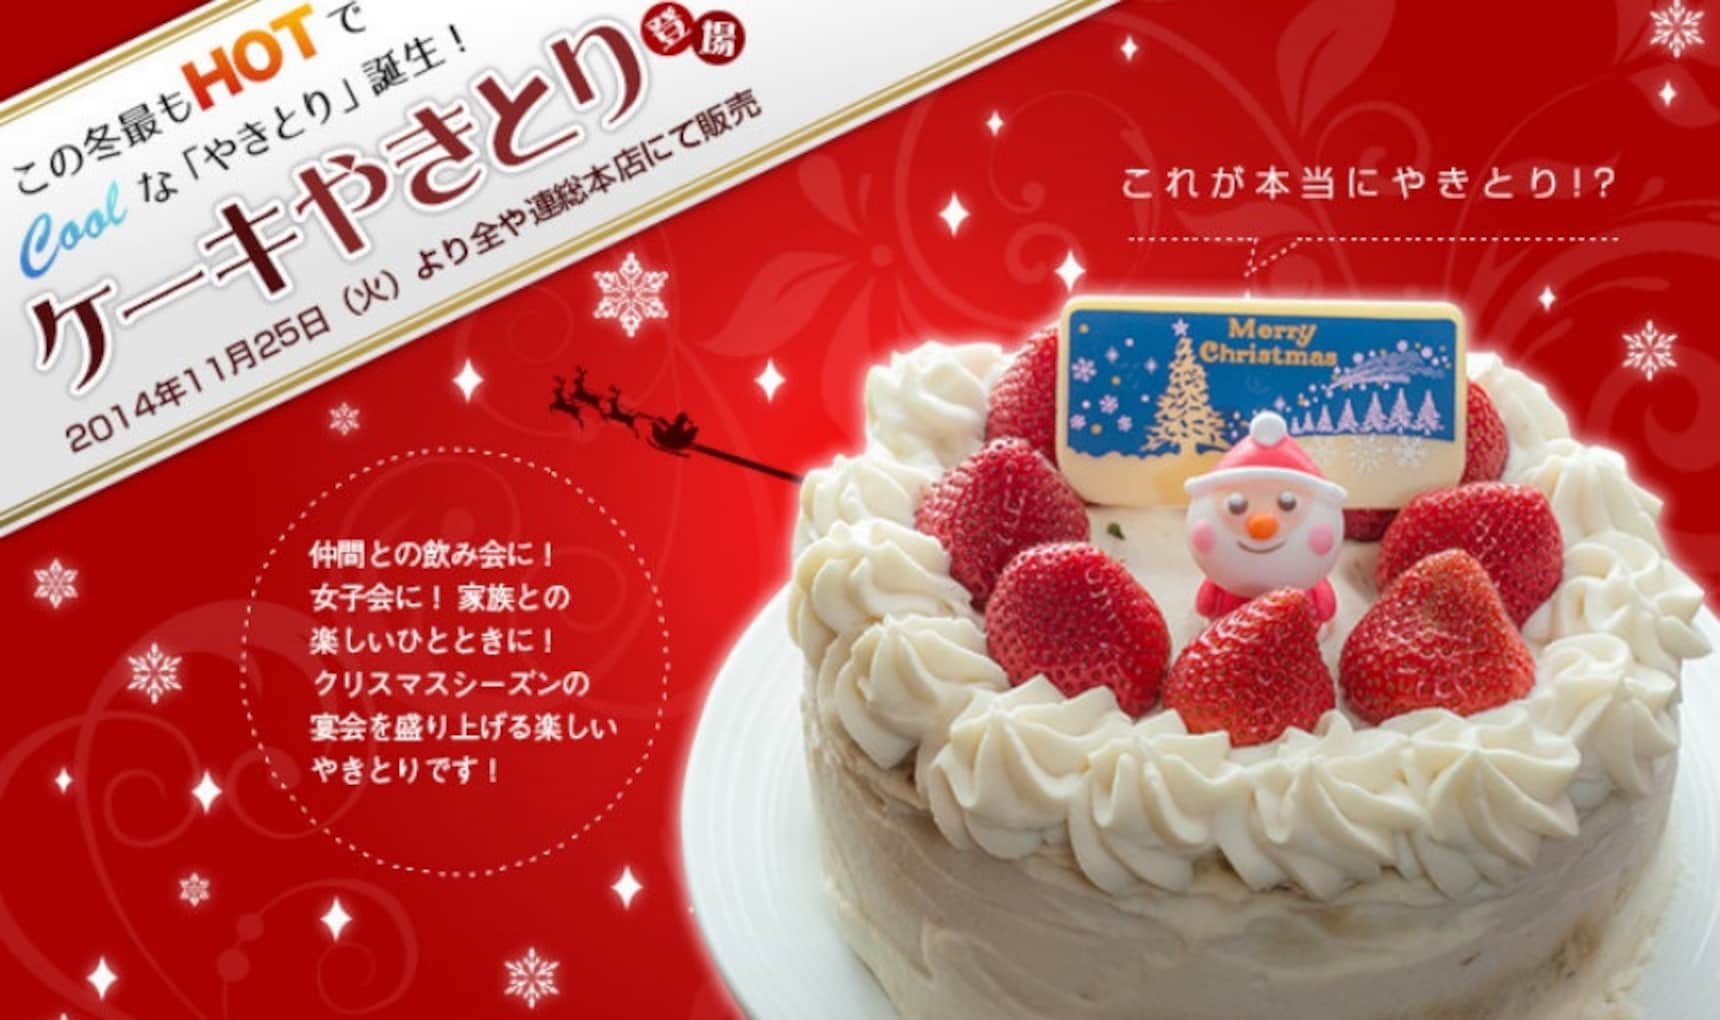 A Christmas Cake Made Out of... What?!